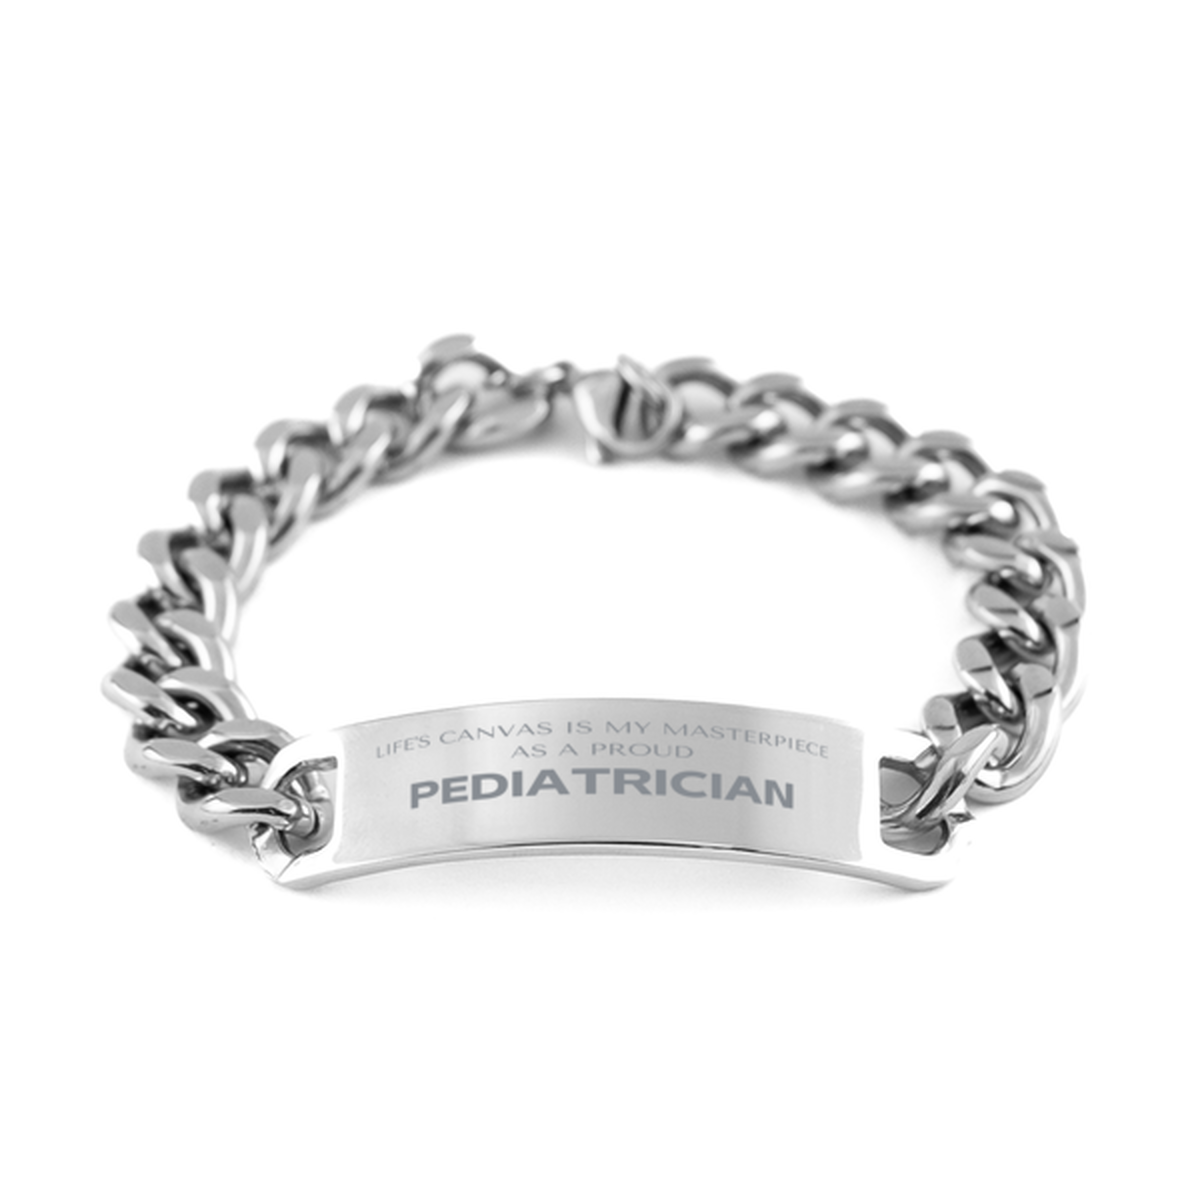 Proud Pediatrician Gifts, Life's canvas is my masterpiece, Epic Birthday Christmas Unique Cuban Chain Stainless Steel Bracelet For Pediatrician, Coworkers, Men, Women, Friends